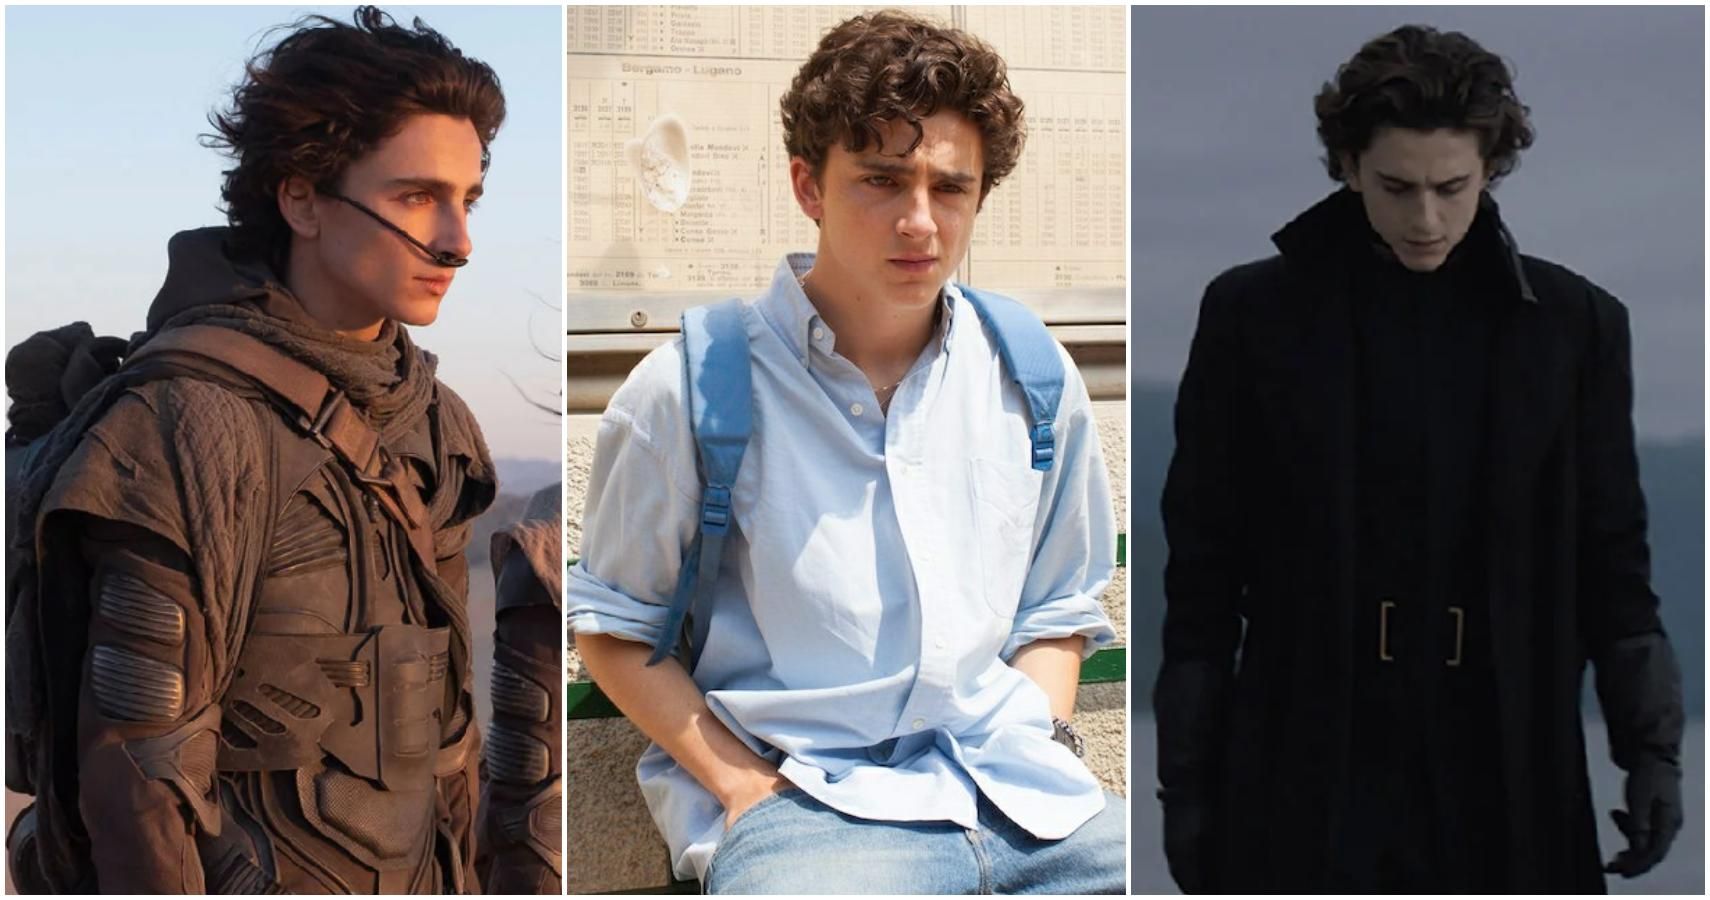 Dune S Timothee Chalamet 10 Facts About His Breakout Role In Call Me By Your Name